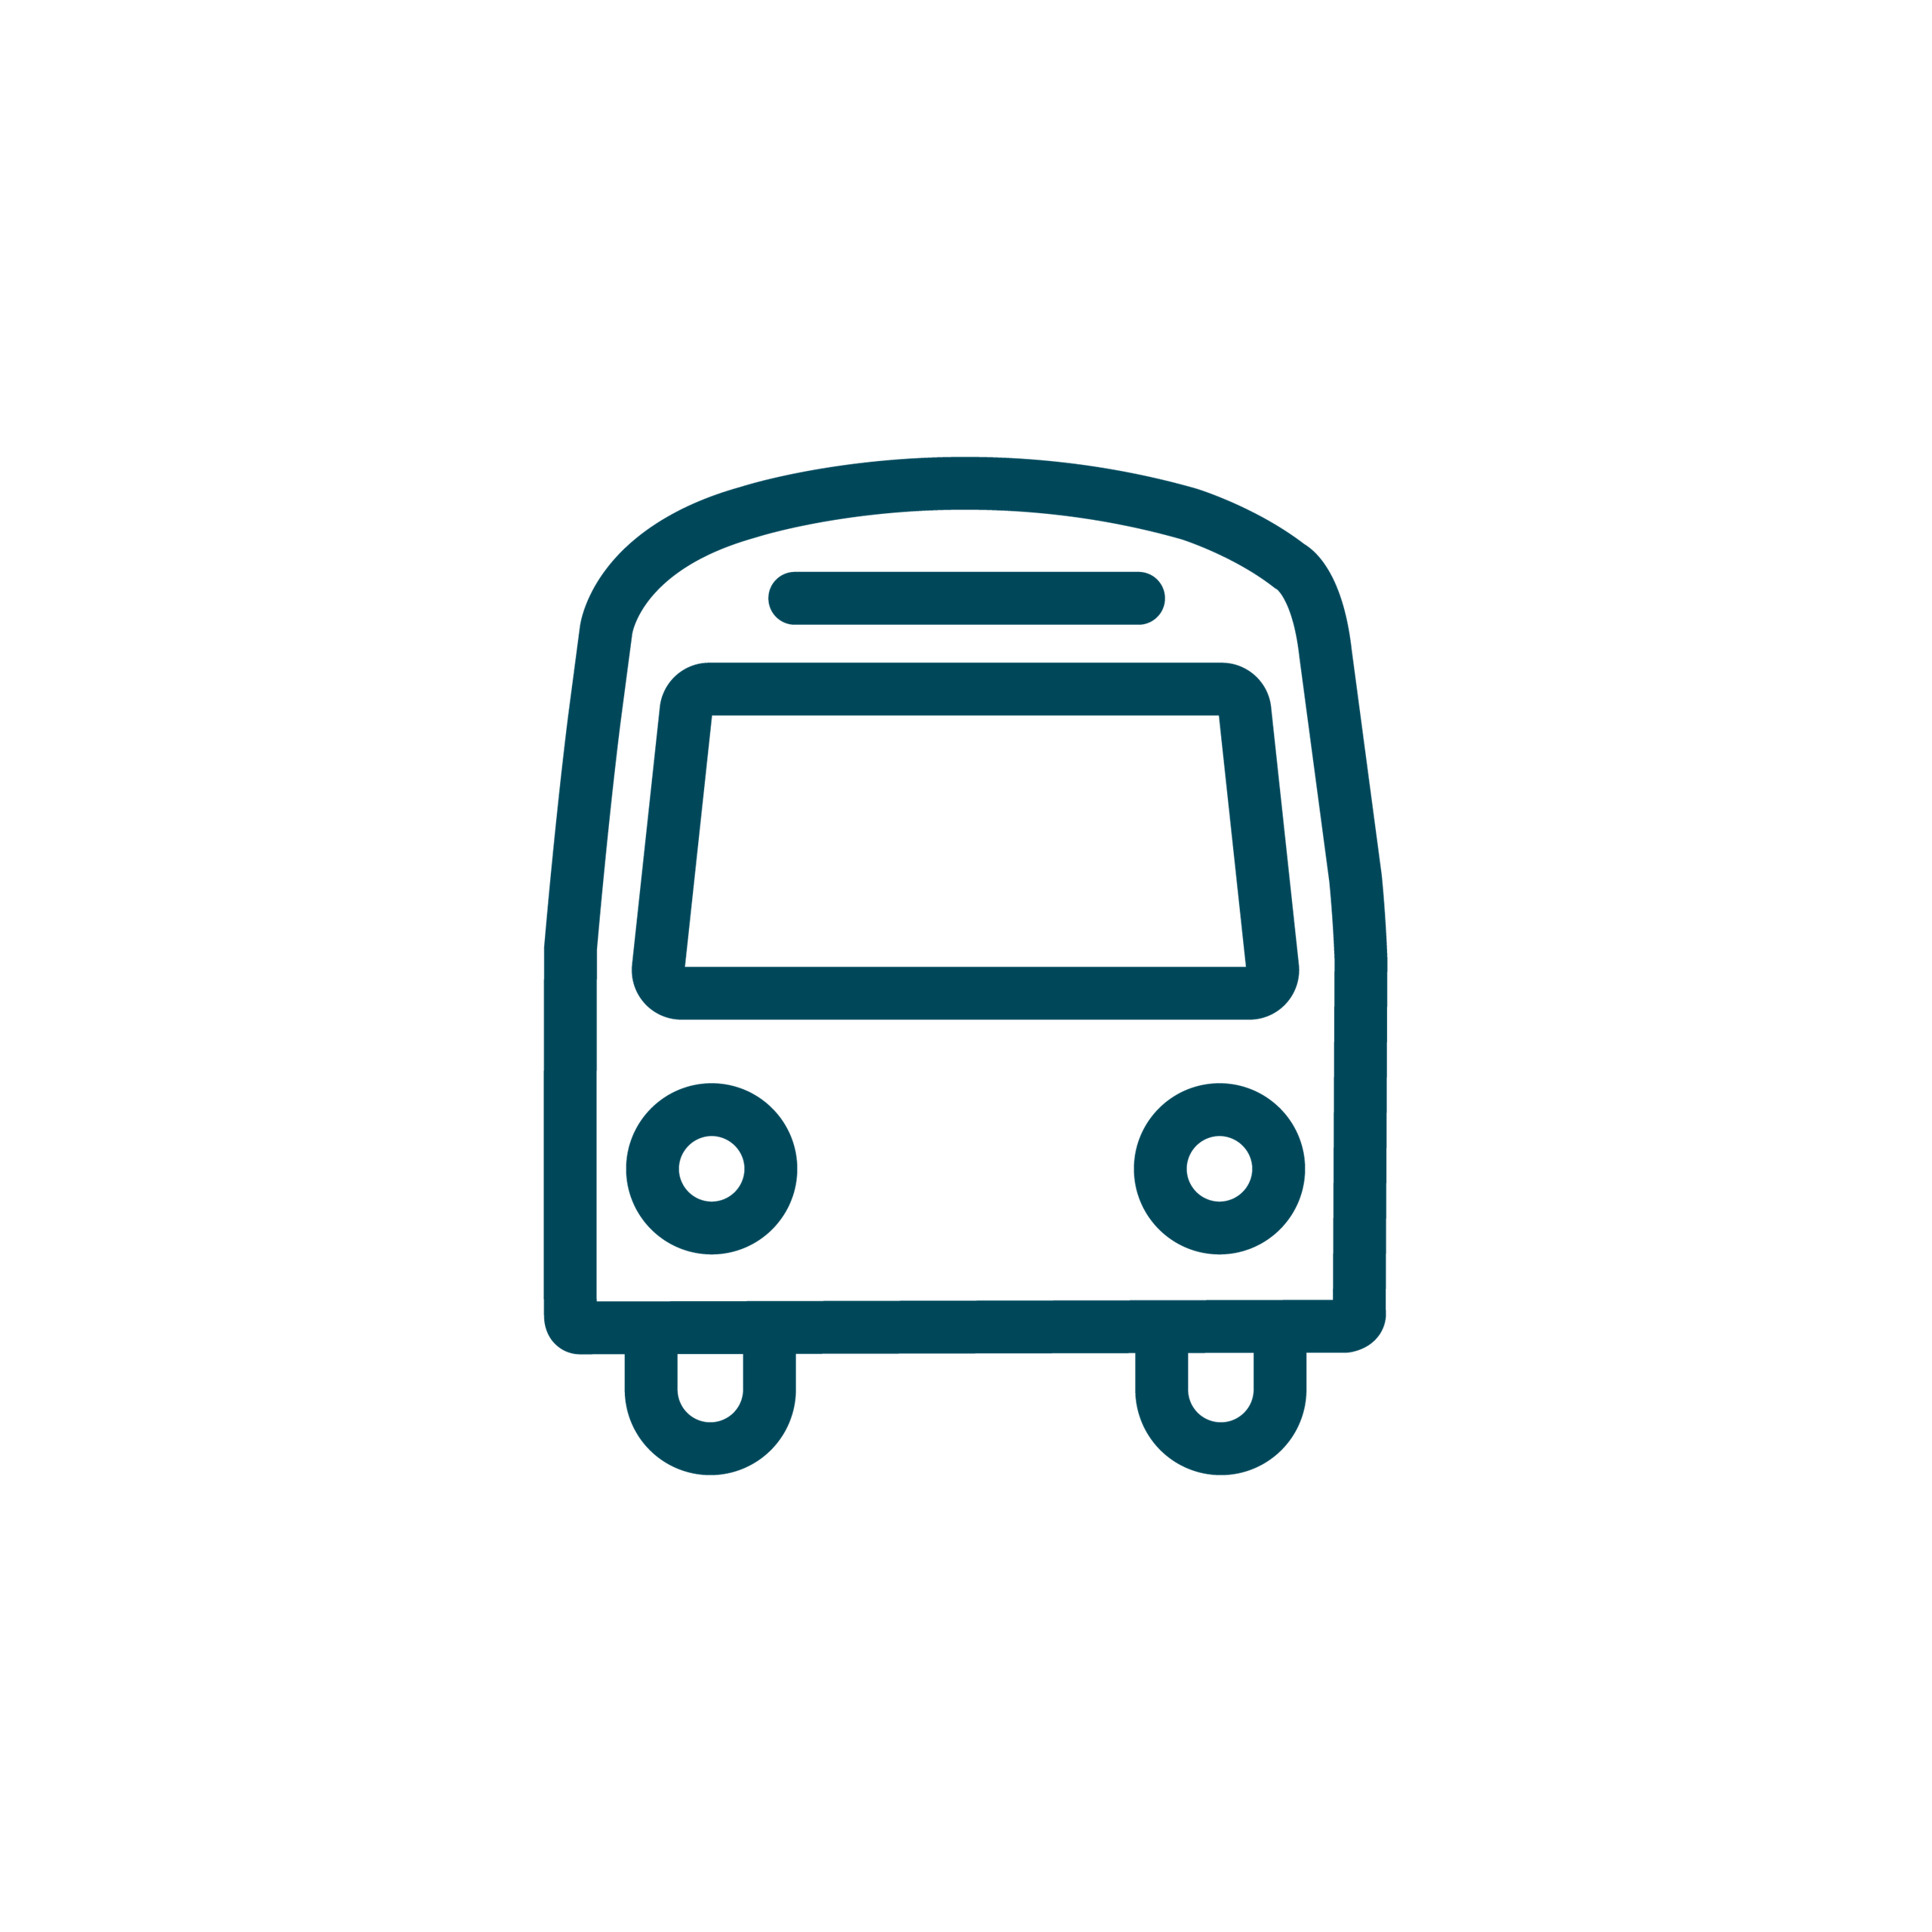 bus_icon_grey.png